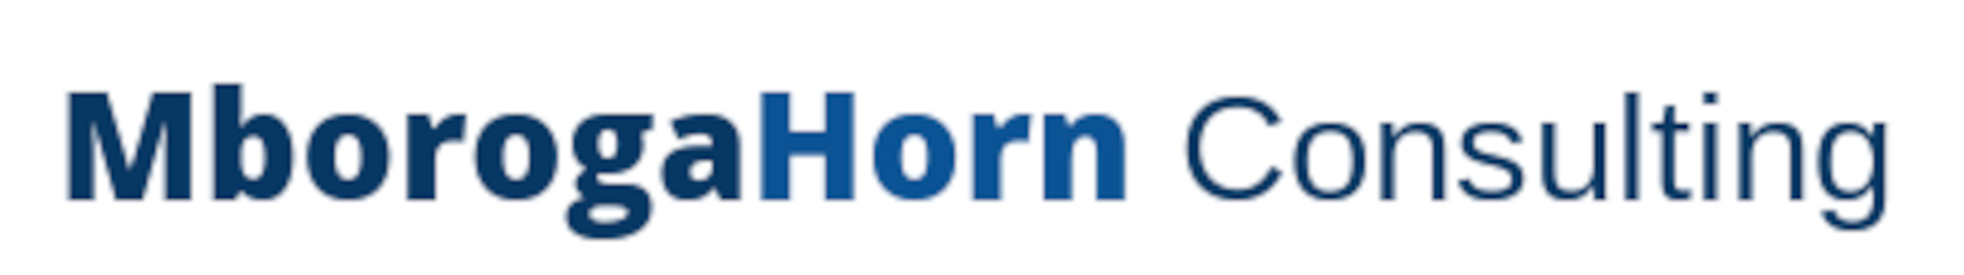 Mboroga Horn Consulting logo, in blue with 'Horn' highlighted